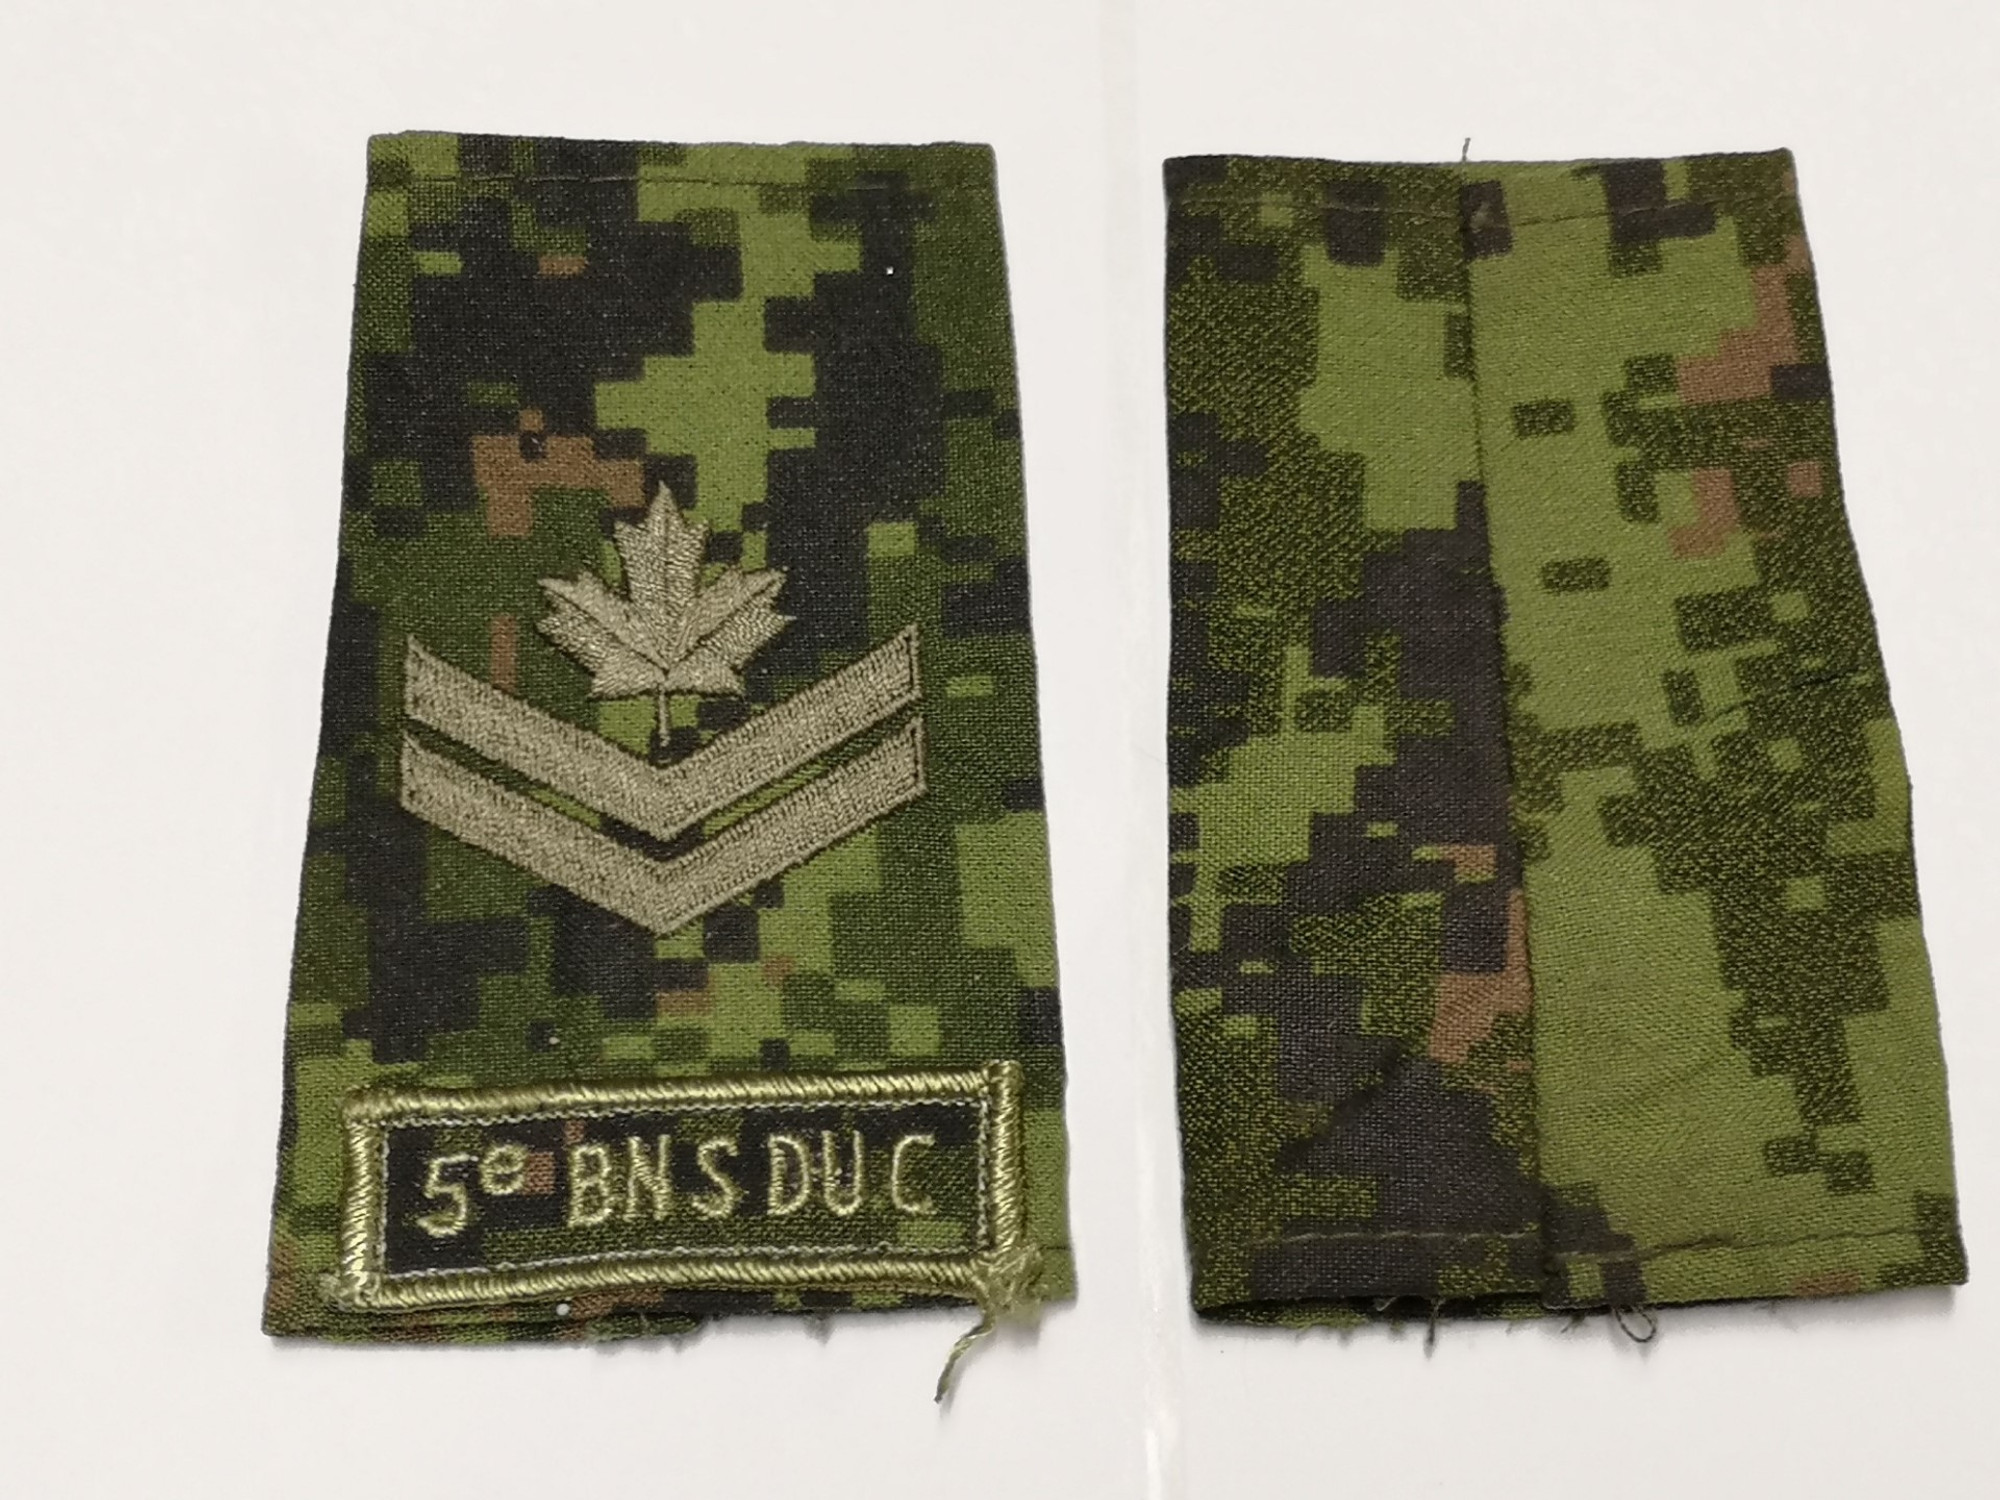 Canadian Armed Forces Cadpat Rank Epaulets 5e BN S DU C - Master Corporal (Army)